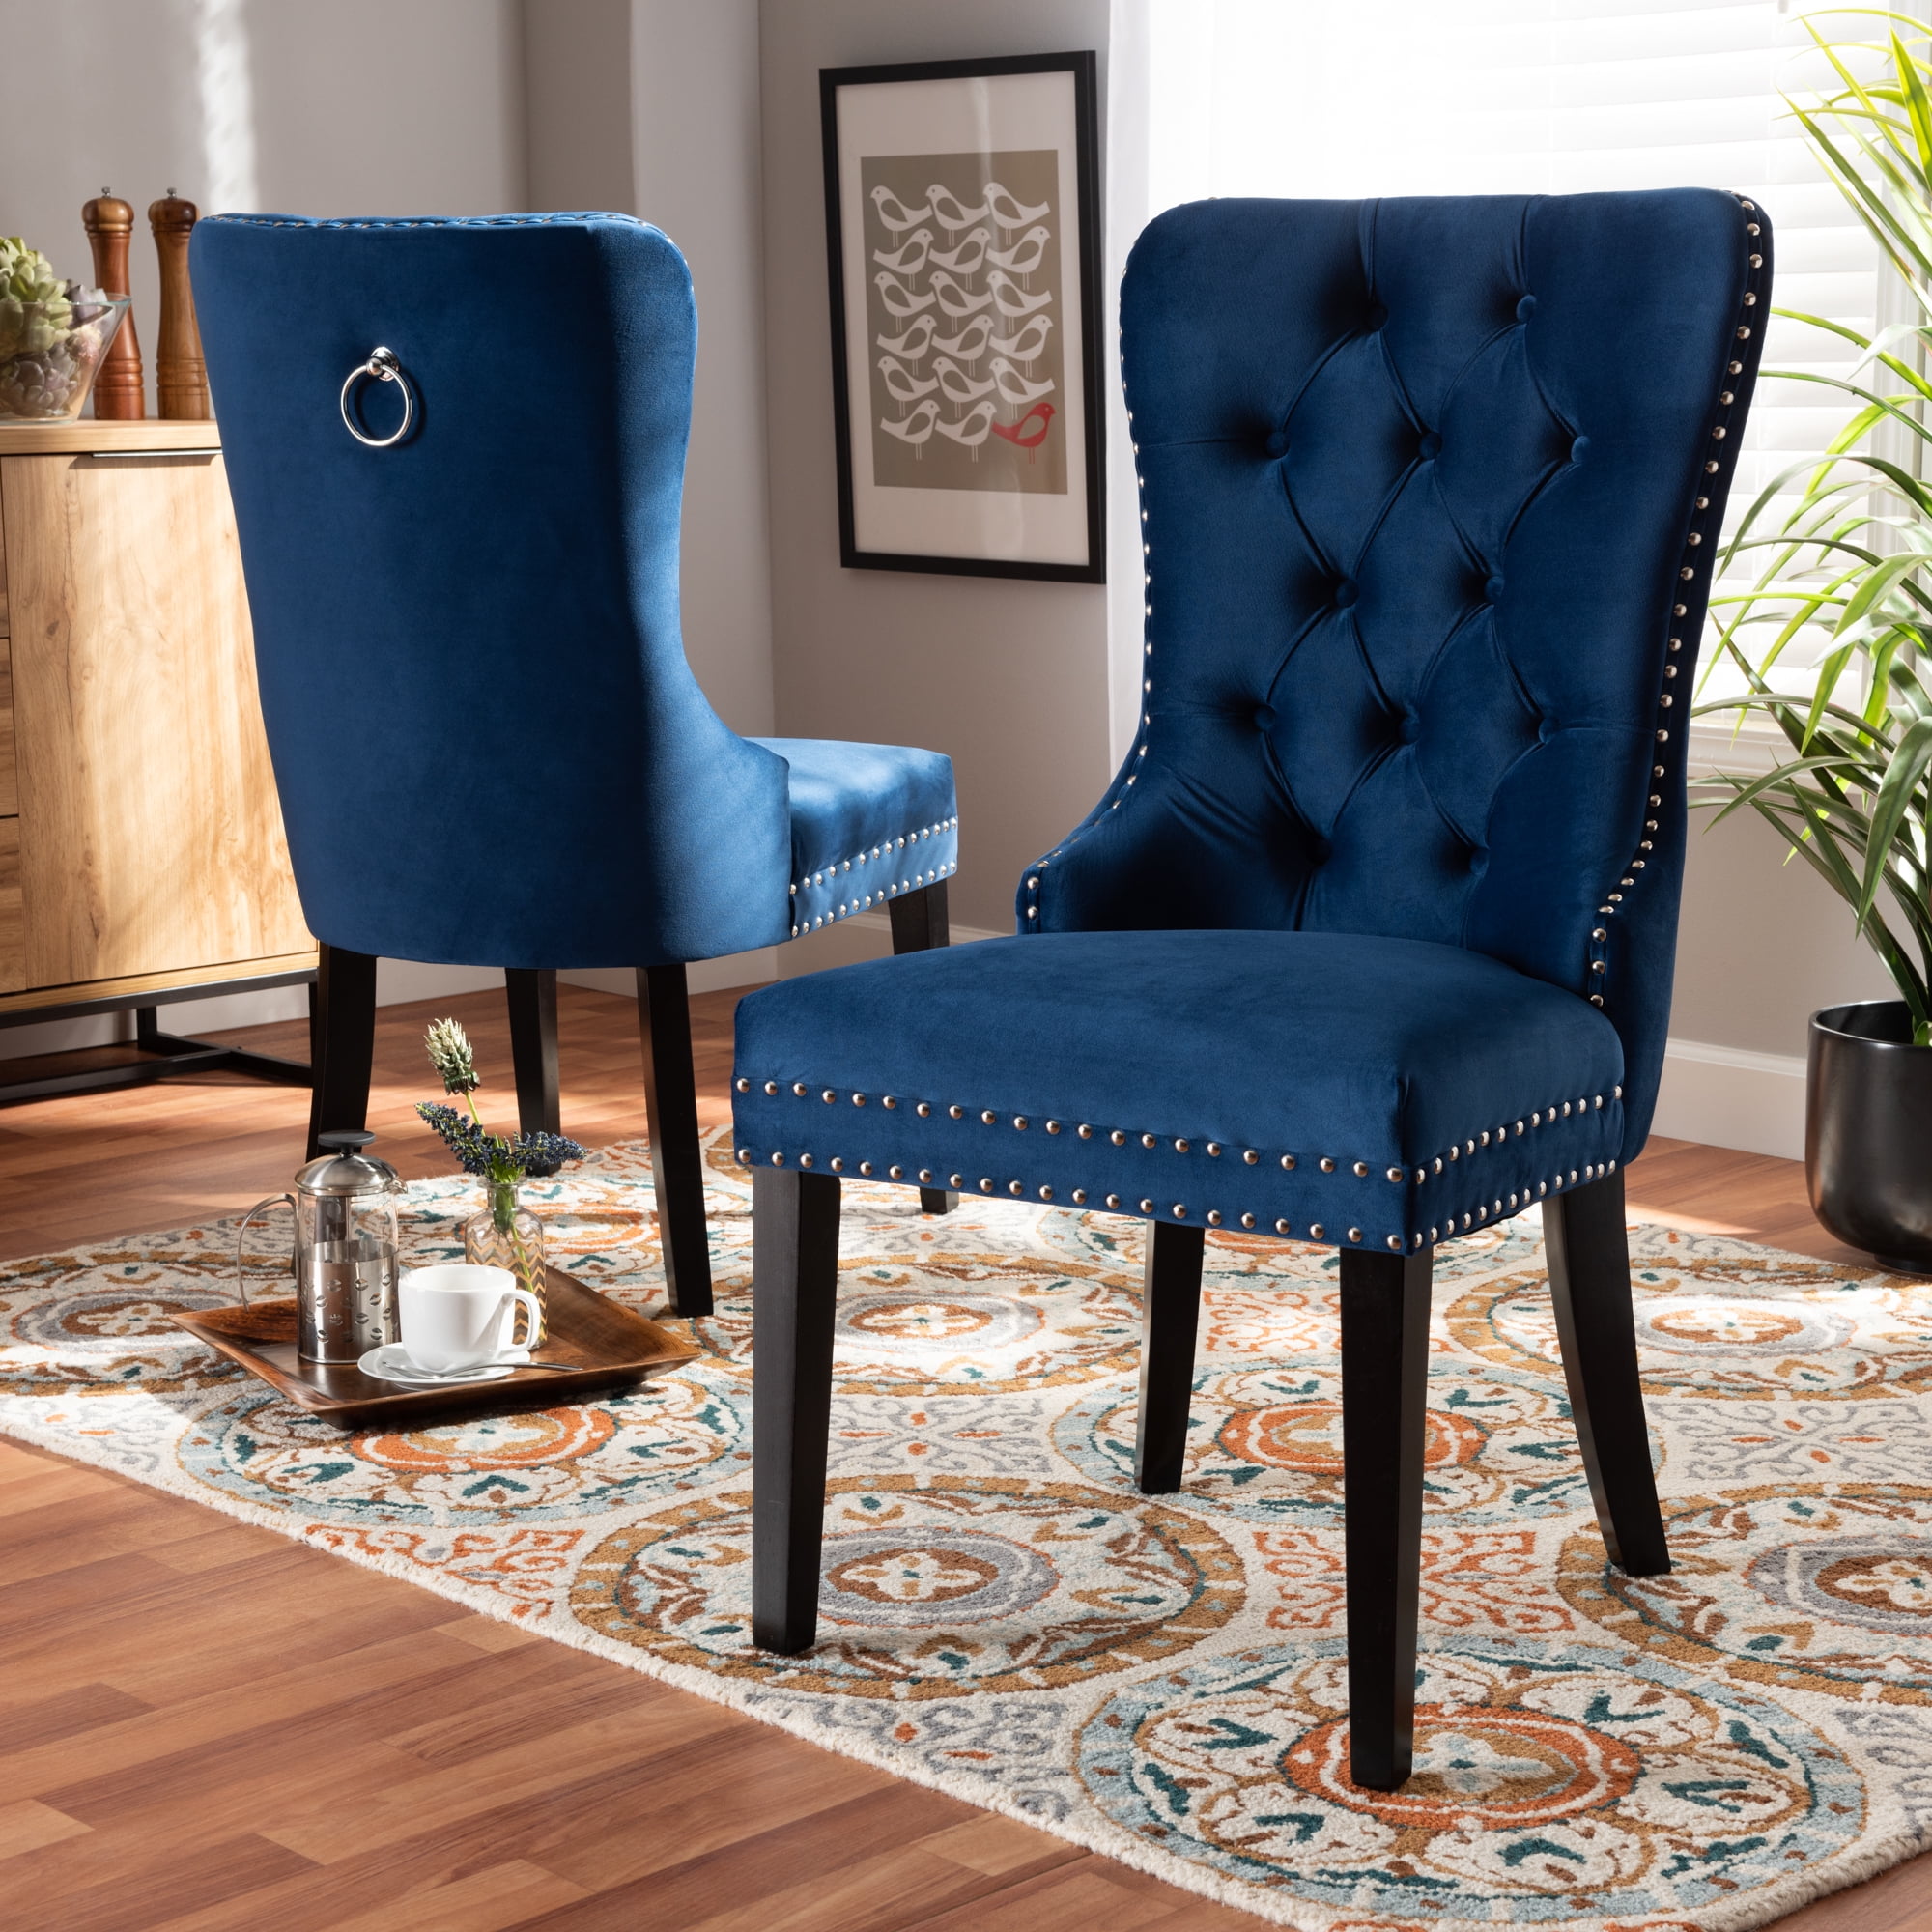 Baxton Studio Remy Modern Transitional, Navy Velvet Tufted Dining Chairs